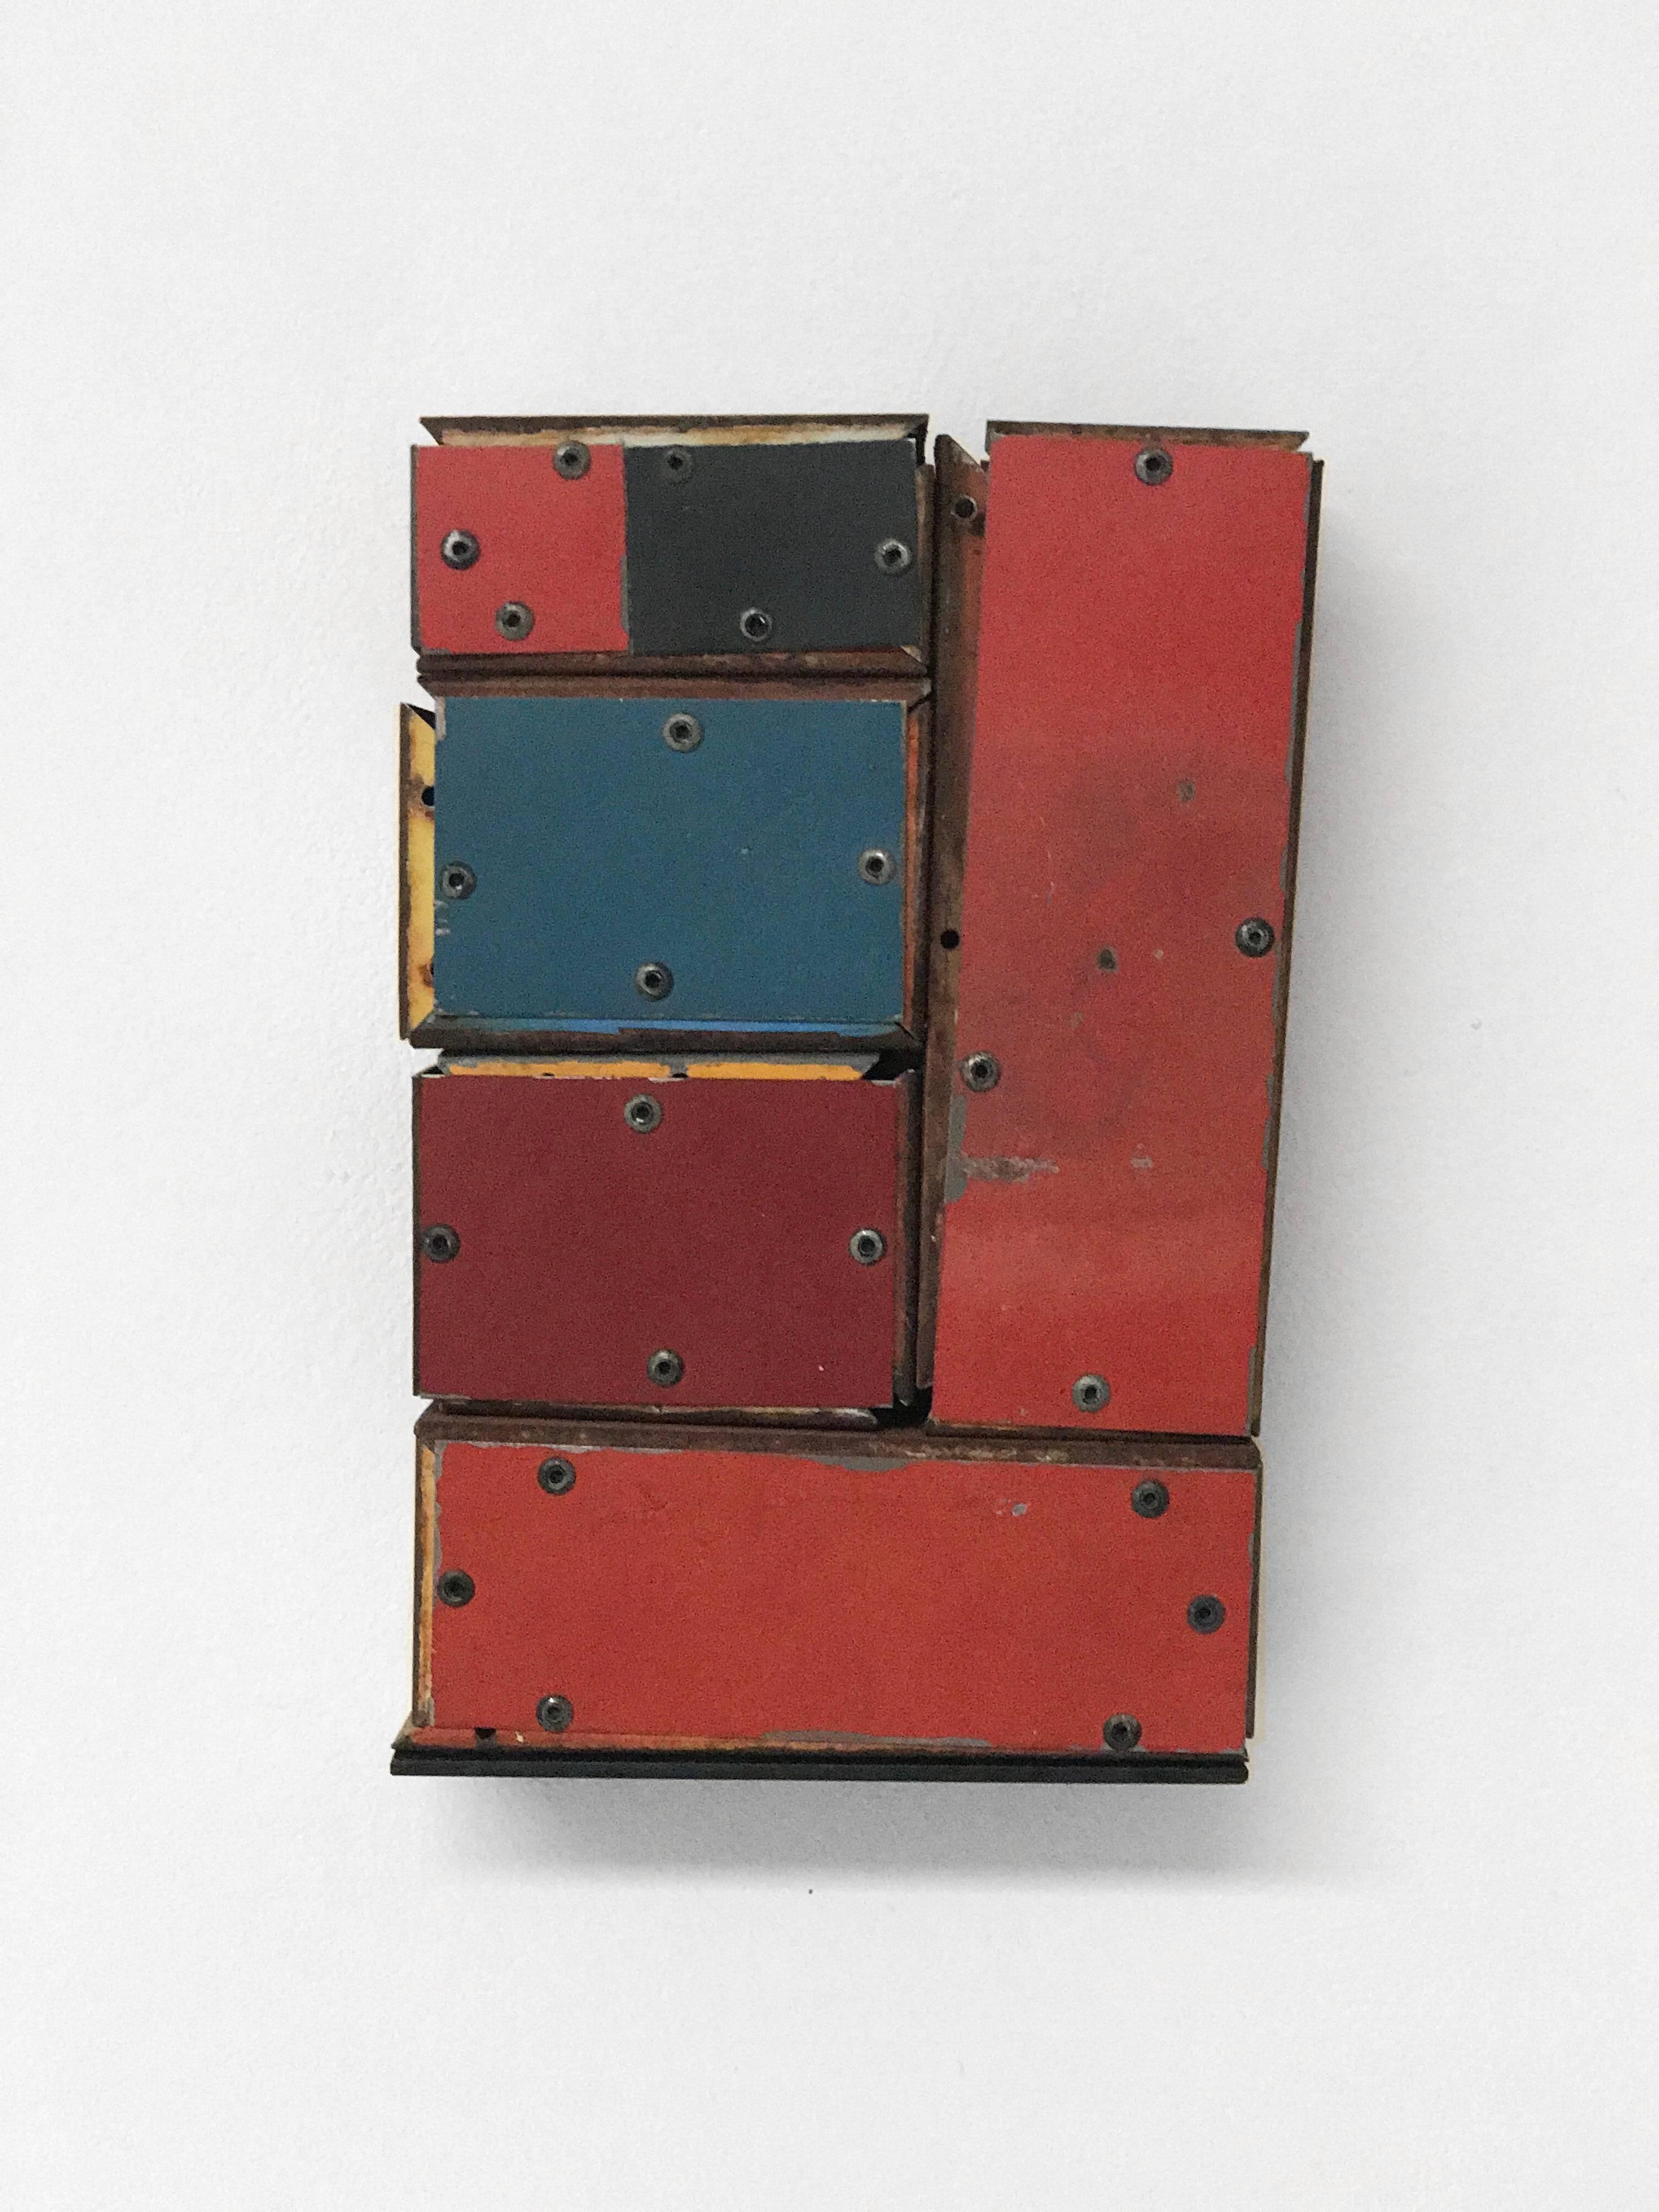 Ted Larsen's Minor Miracle is a hard-edged sculptural, mixed media, painting. Primary colors include rustic red, blue, yellow, and black. Minor Miracle is Constructivist, Bauhaus, Abstract Geometric, Contemporary and Cubist influenced.

Ted Larsen